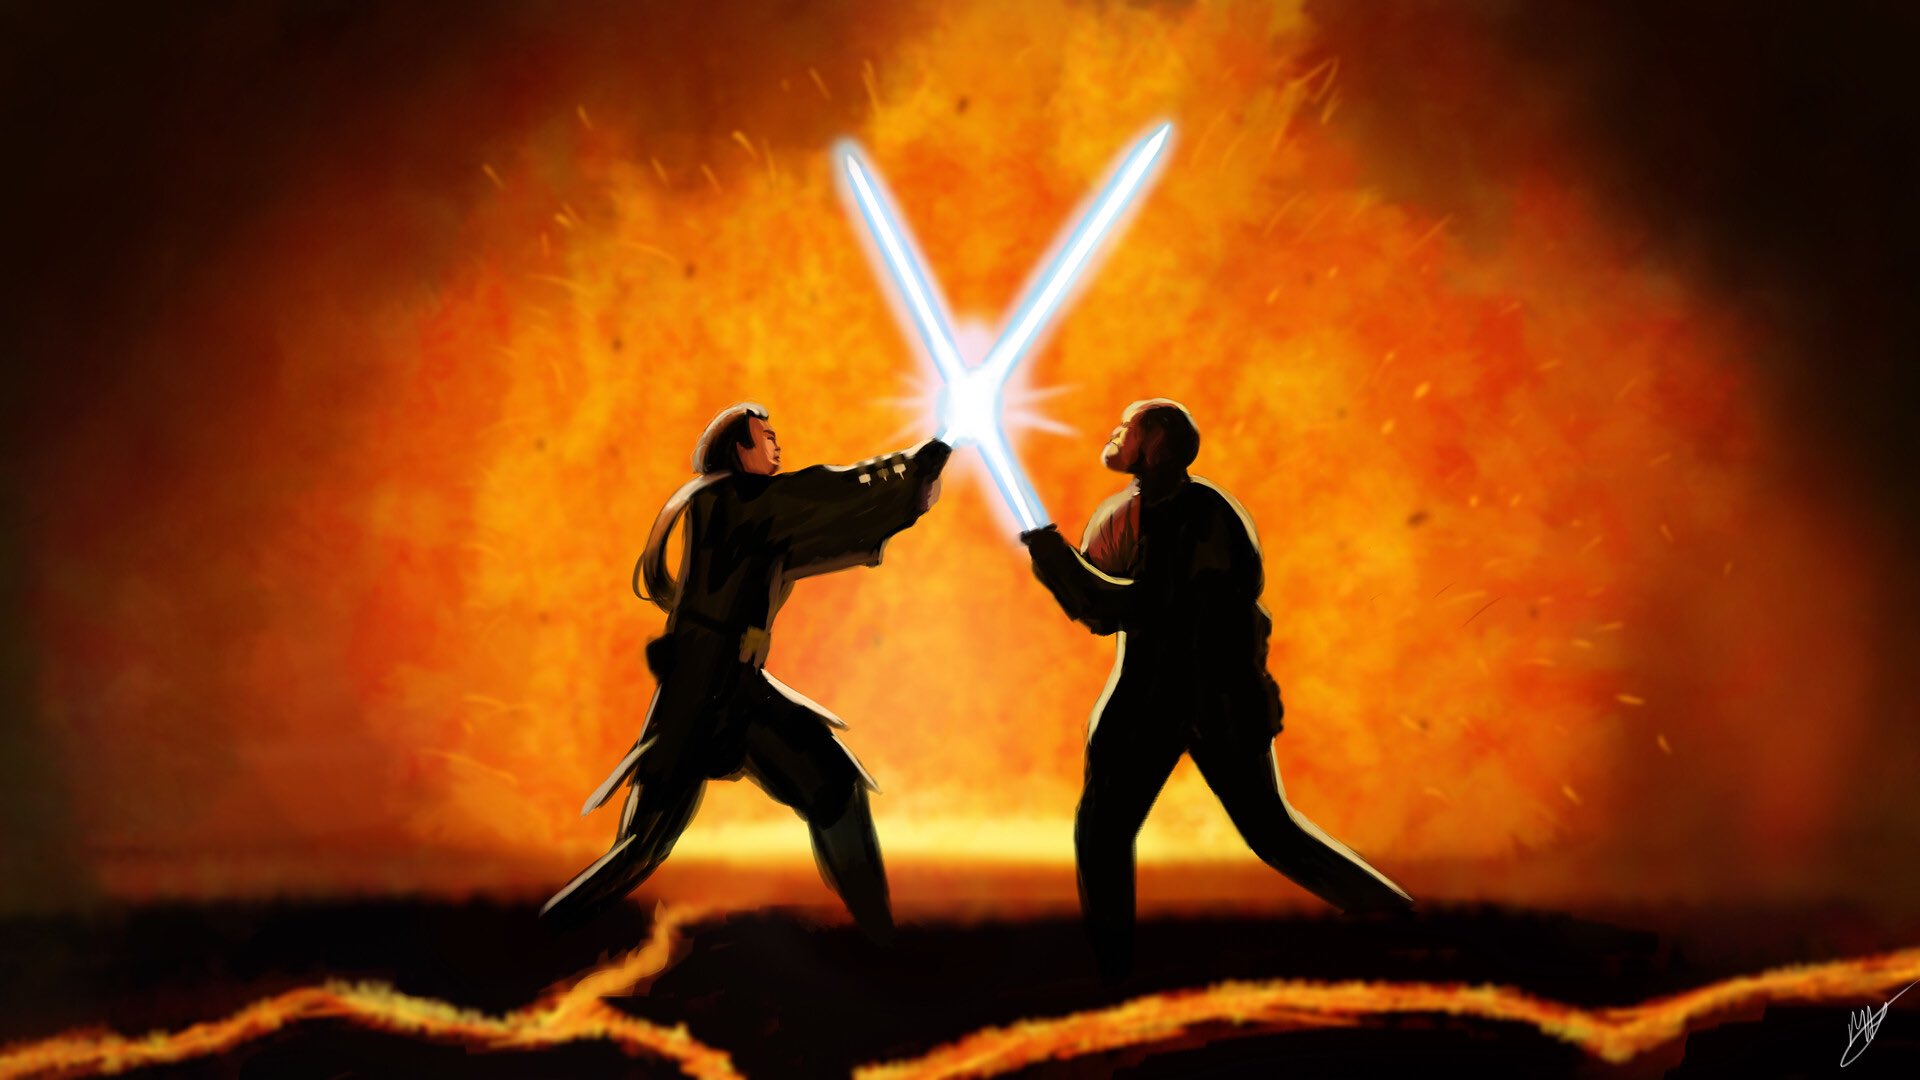 famous historic battles - star wars battle of the heroes